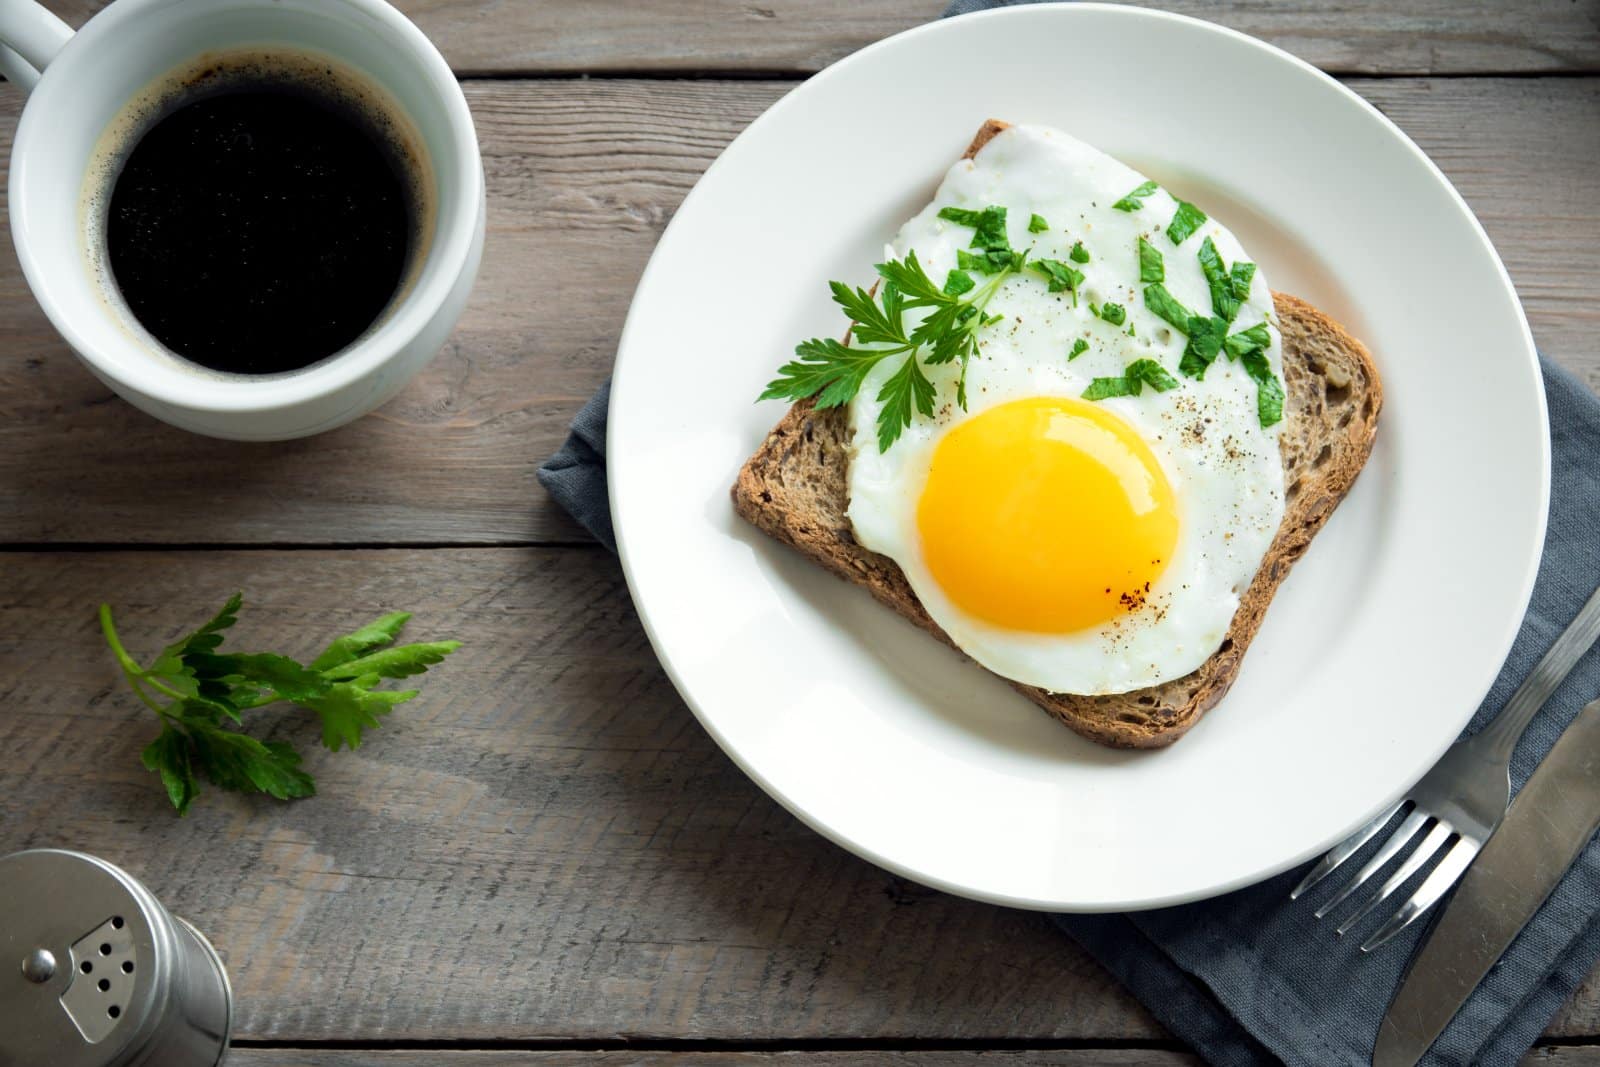 <p class="wp-caption-text">Image Credit: Shutterstock / Oksana Mizina</p>  <p><span>In this town, a cup of coffee and eggs might just influence global politics. It’s breakfast with a side of world domination.</span></p>